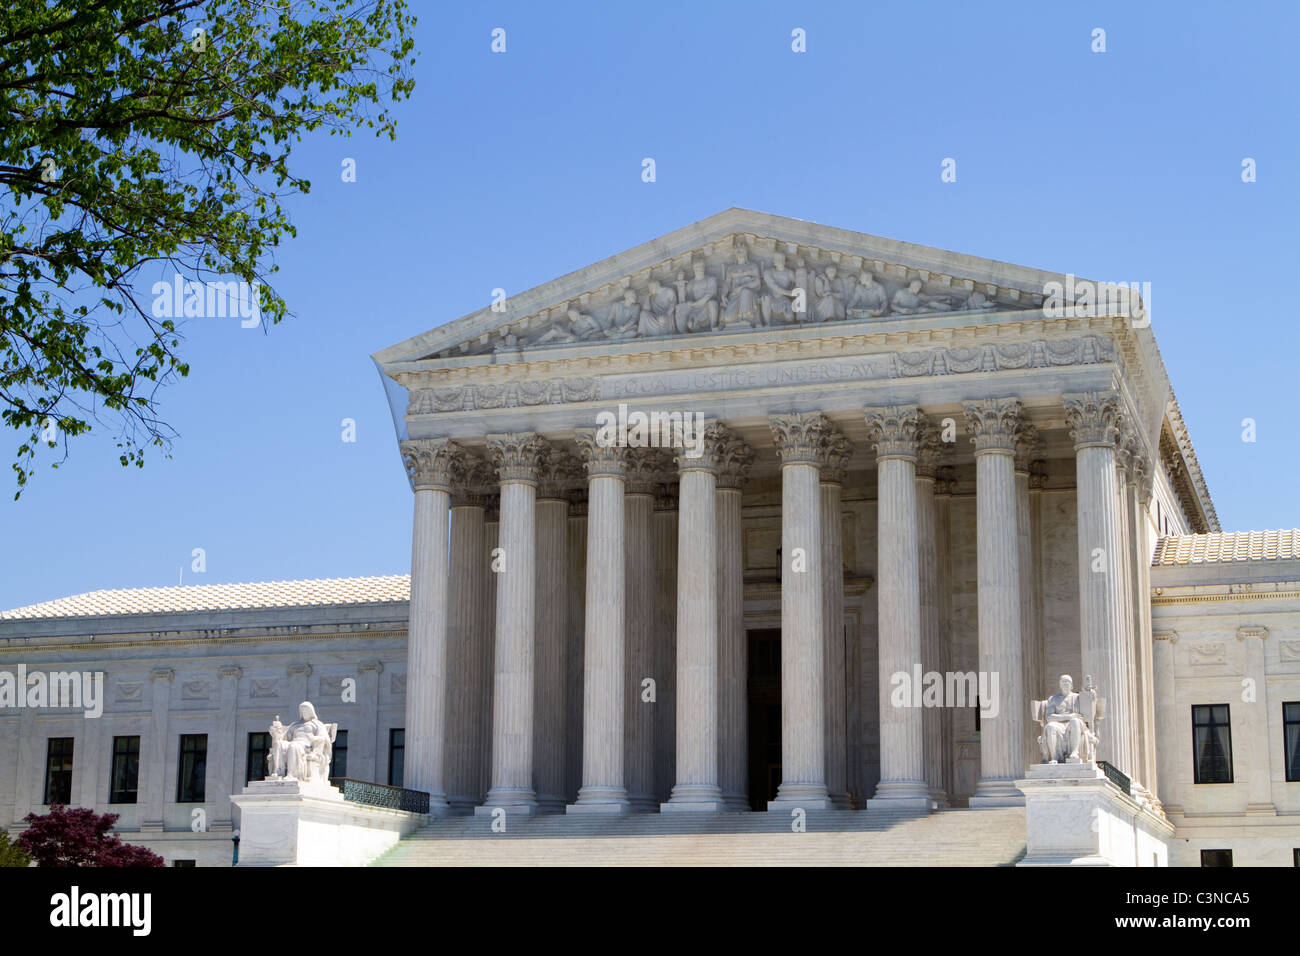 USA Supreme Court building in Washington, D.C. against a blue sky background. Stock Photo